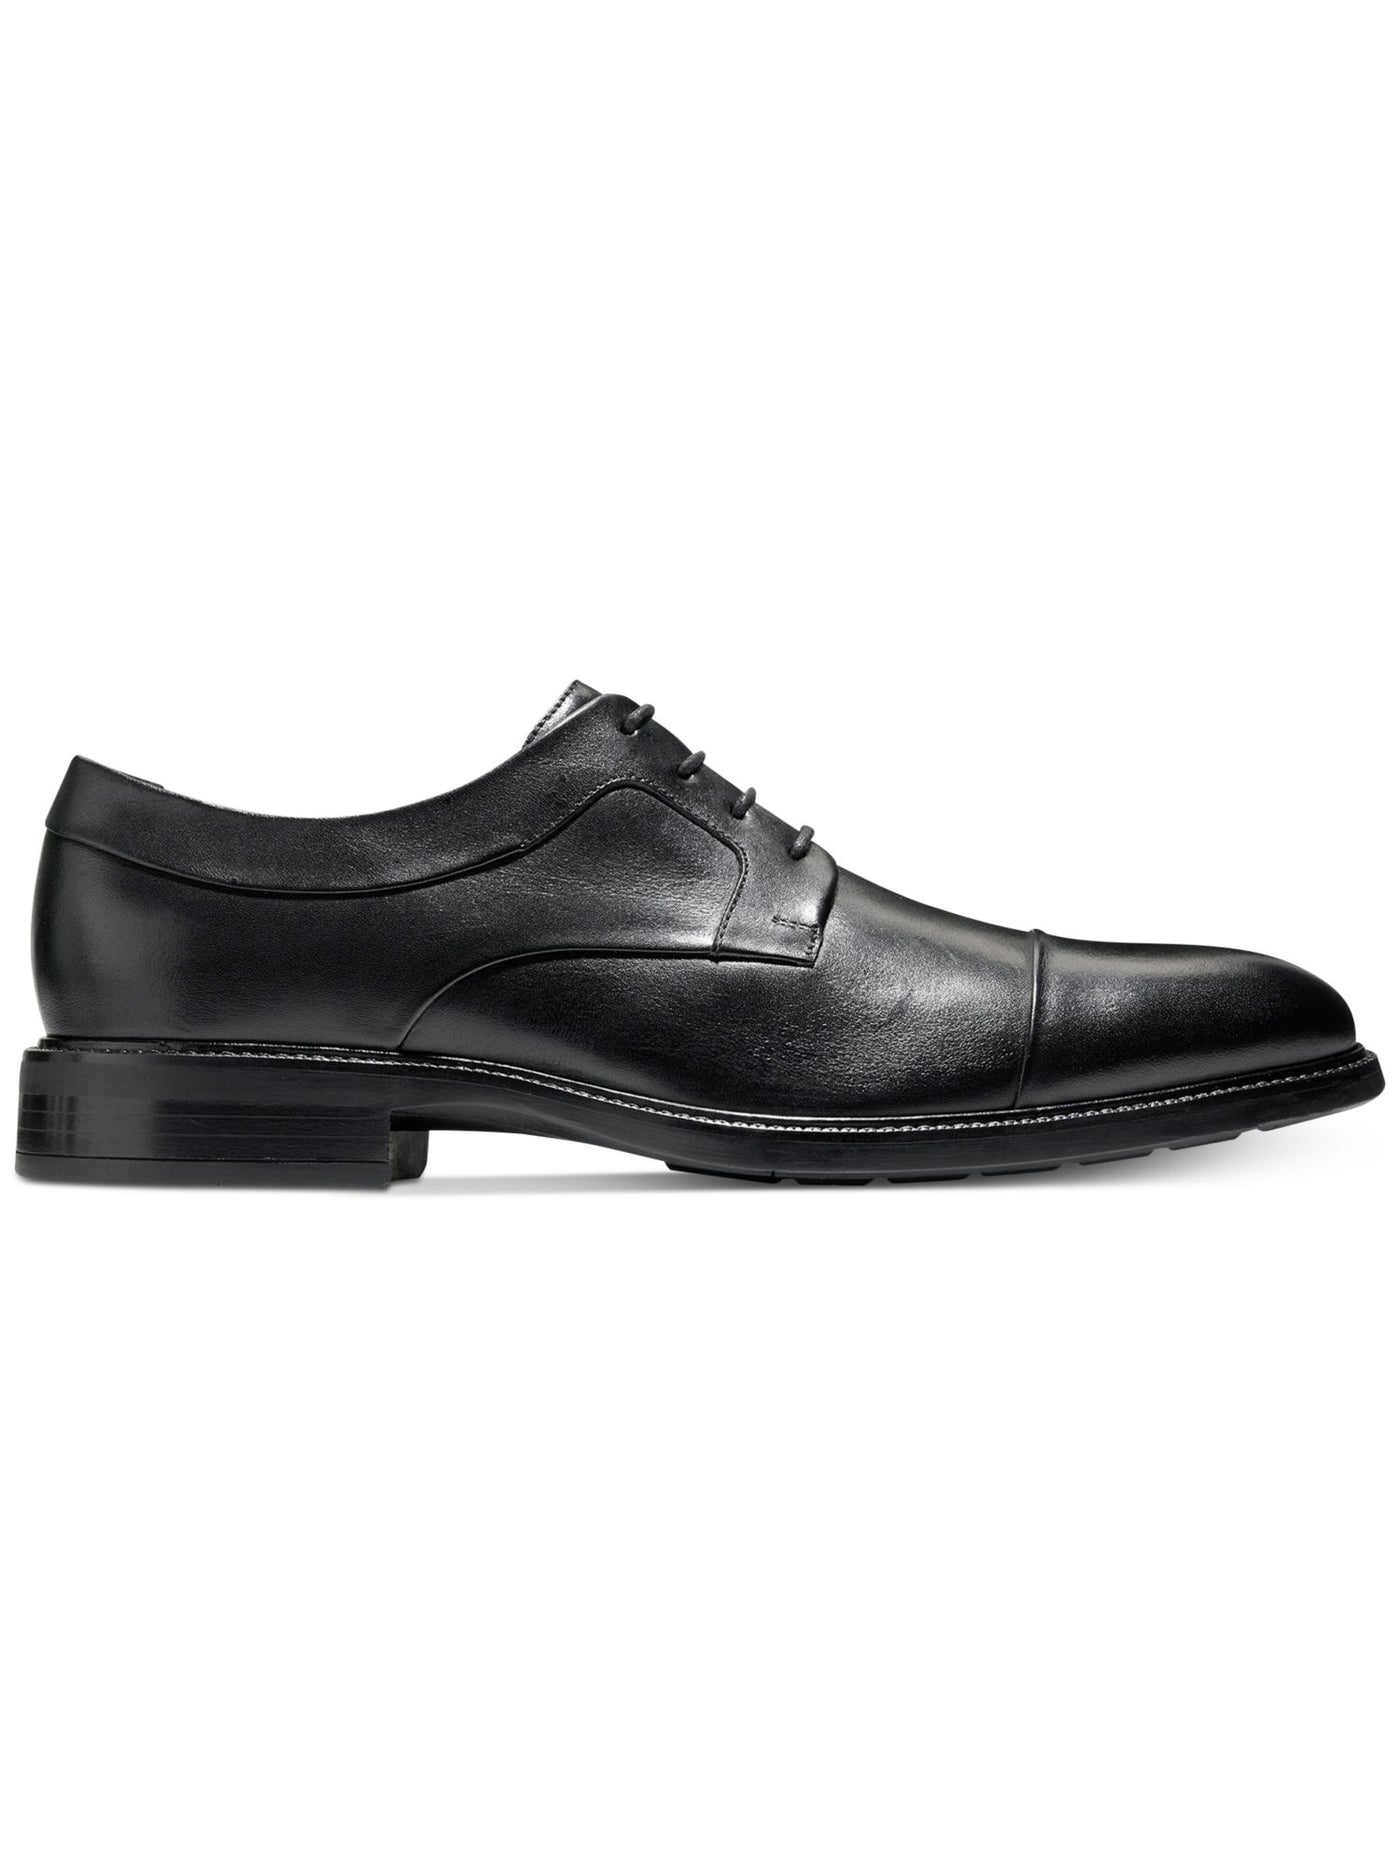 COLE HAAN Mens Black Padded Hartsfield Cap Toe Lace-Up Leather Dress Oxford Shoes 10 M